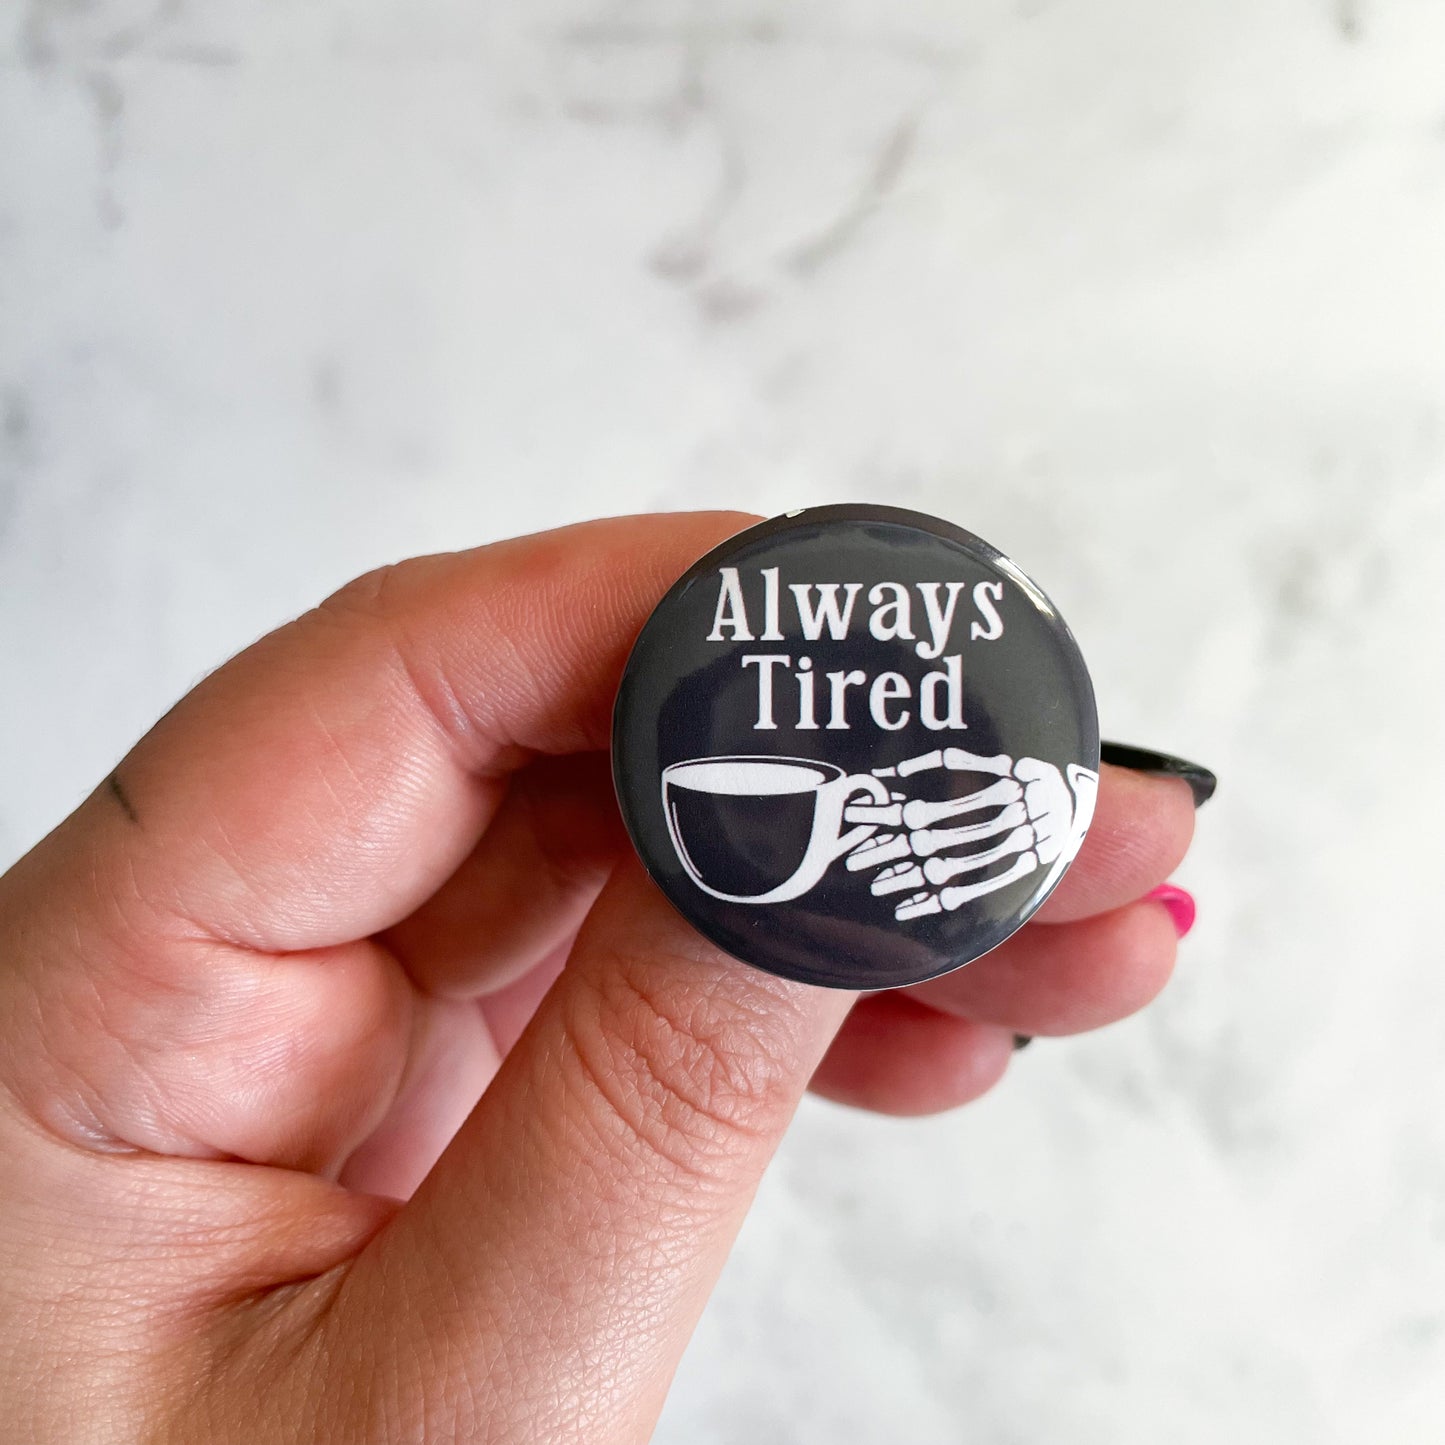 Always Tired Coffee Button / Badge (Buy 4 Get 1 FREE)